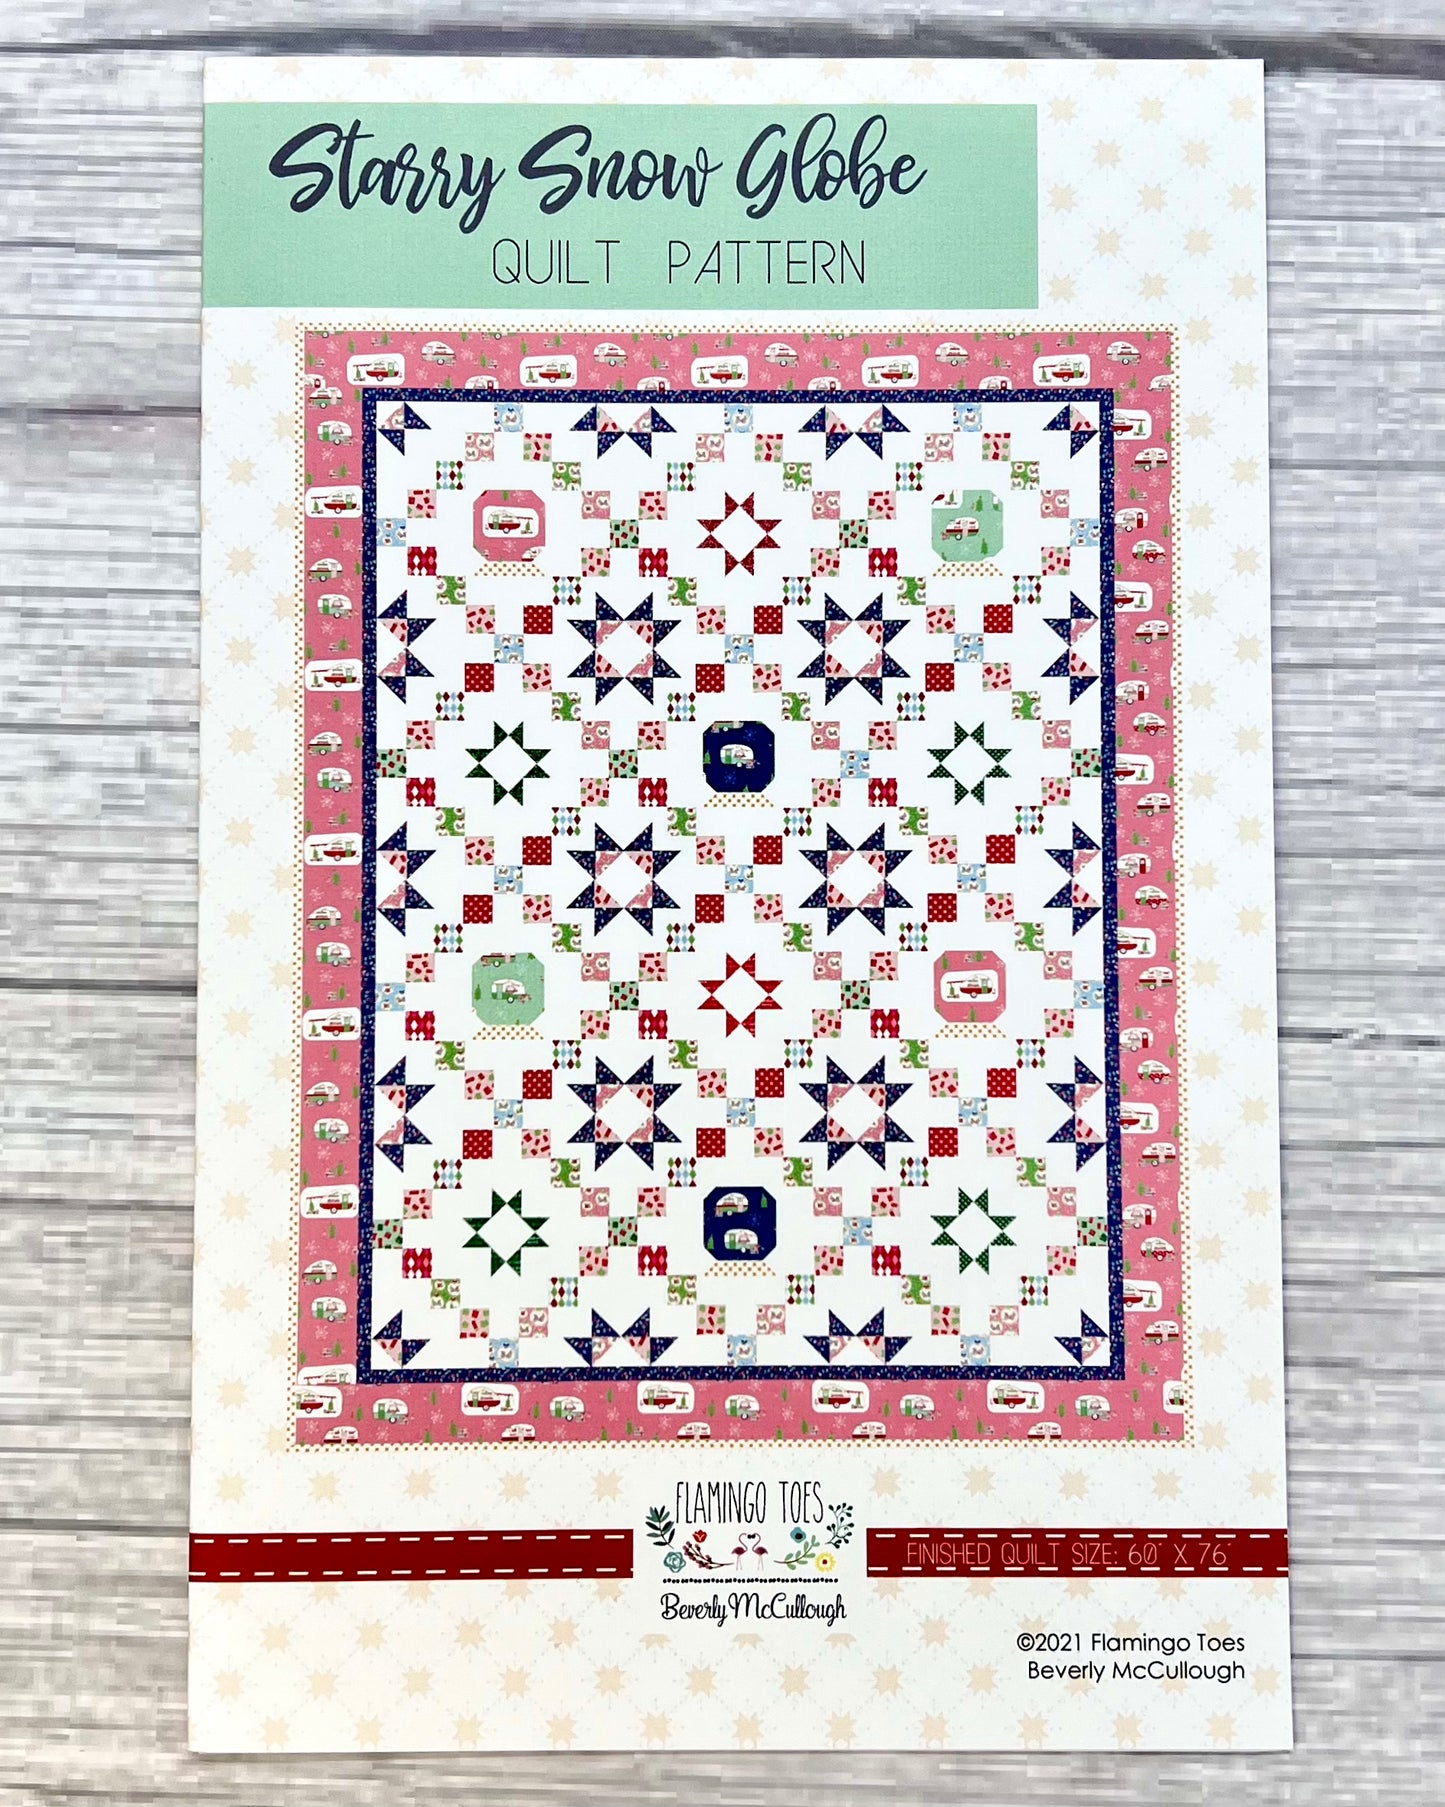 Starry Snow Globe Quilt Pattern, by Flamingo Toes, Beverly McCullough